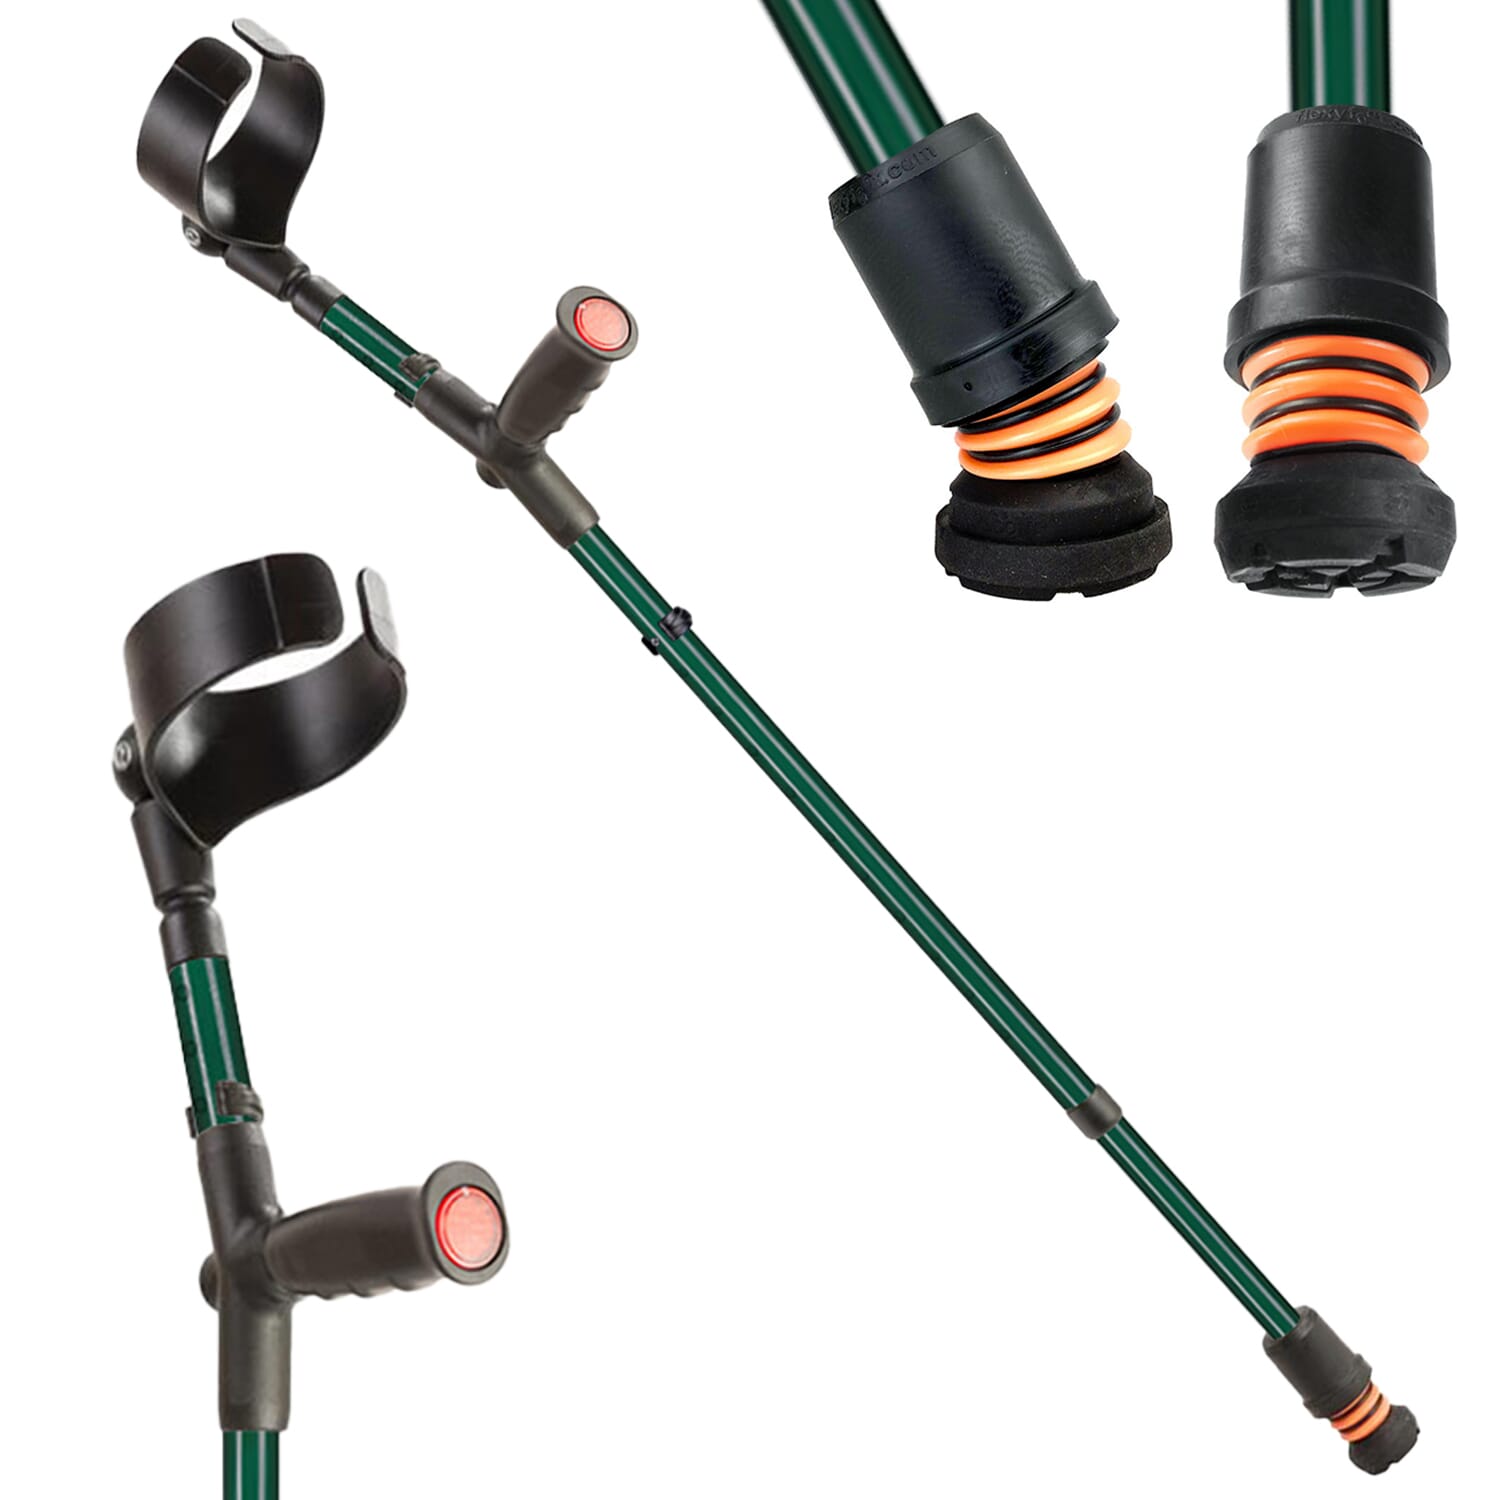 View Flexyfoot Soft Grip Double Adjustable Crutches British Racing Green Single information